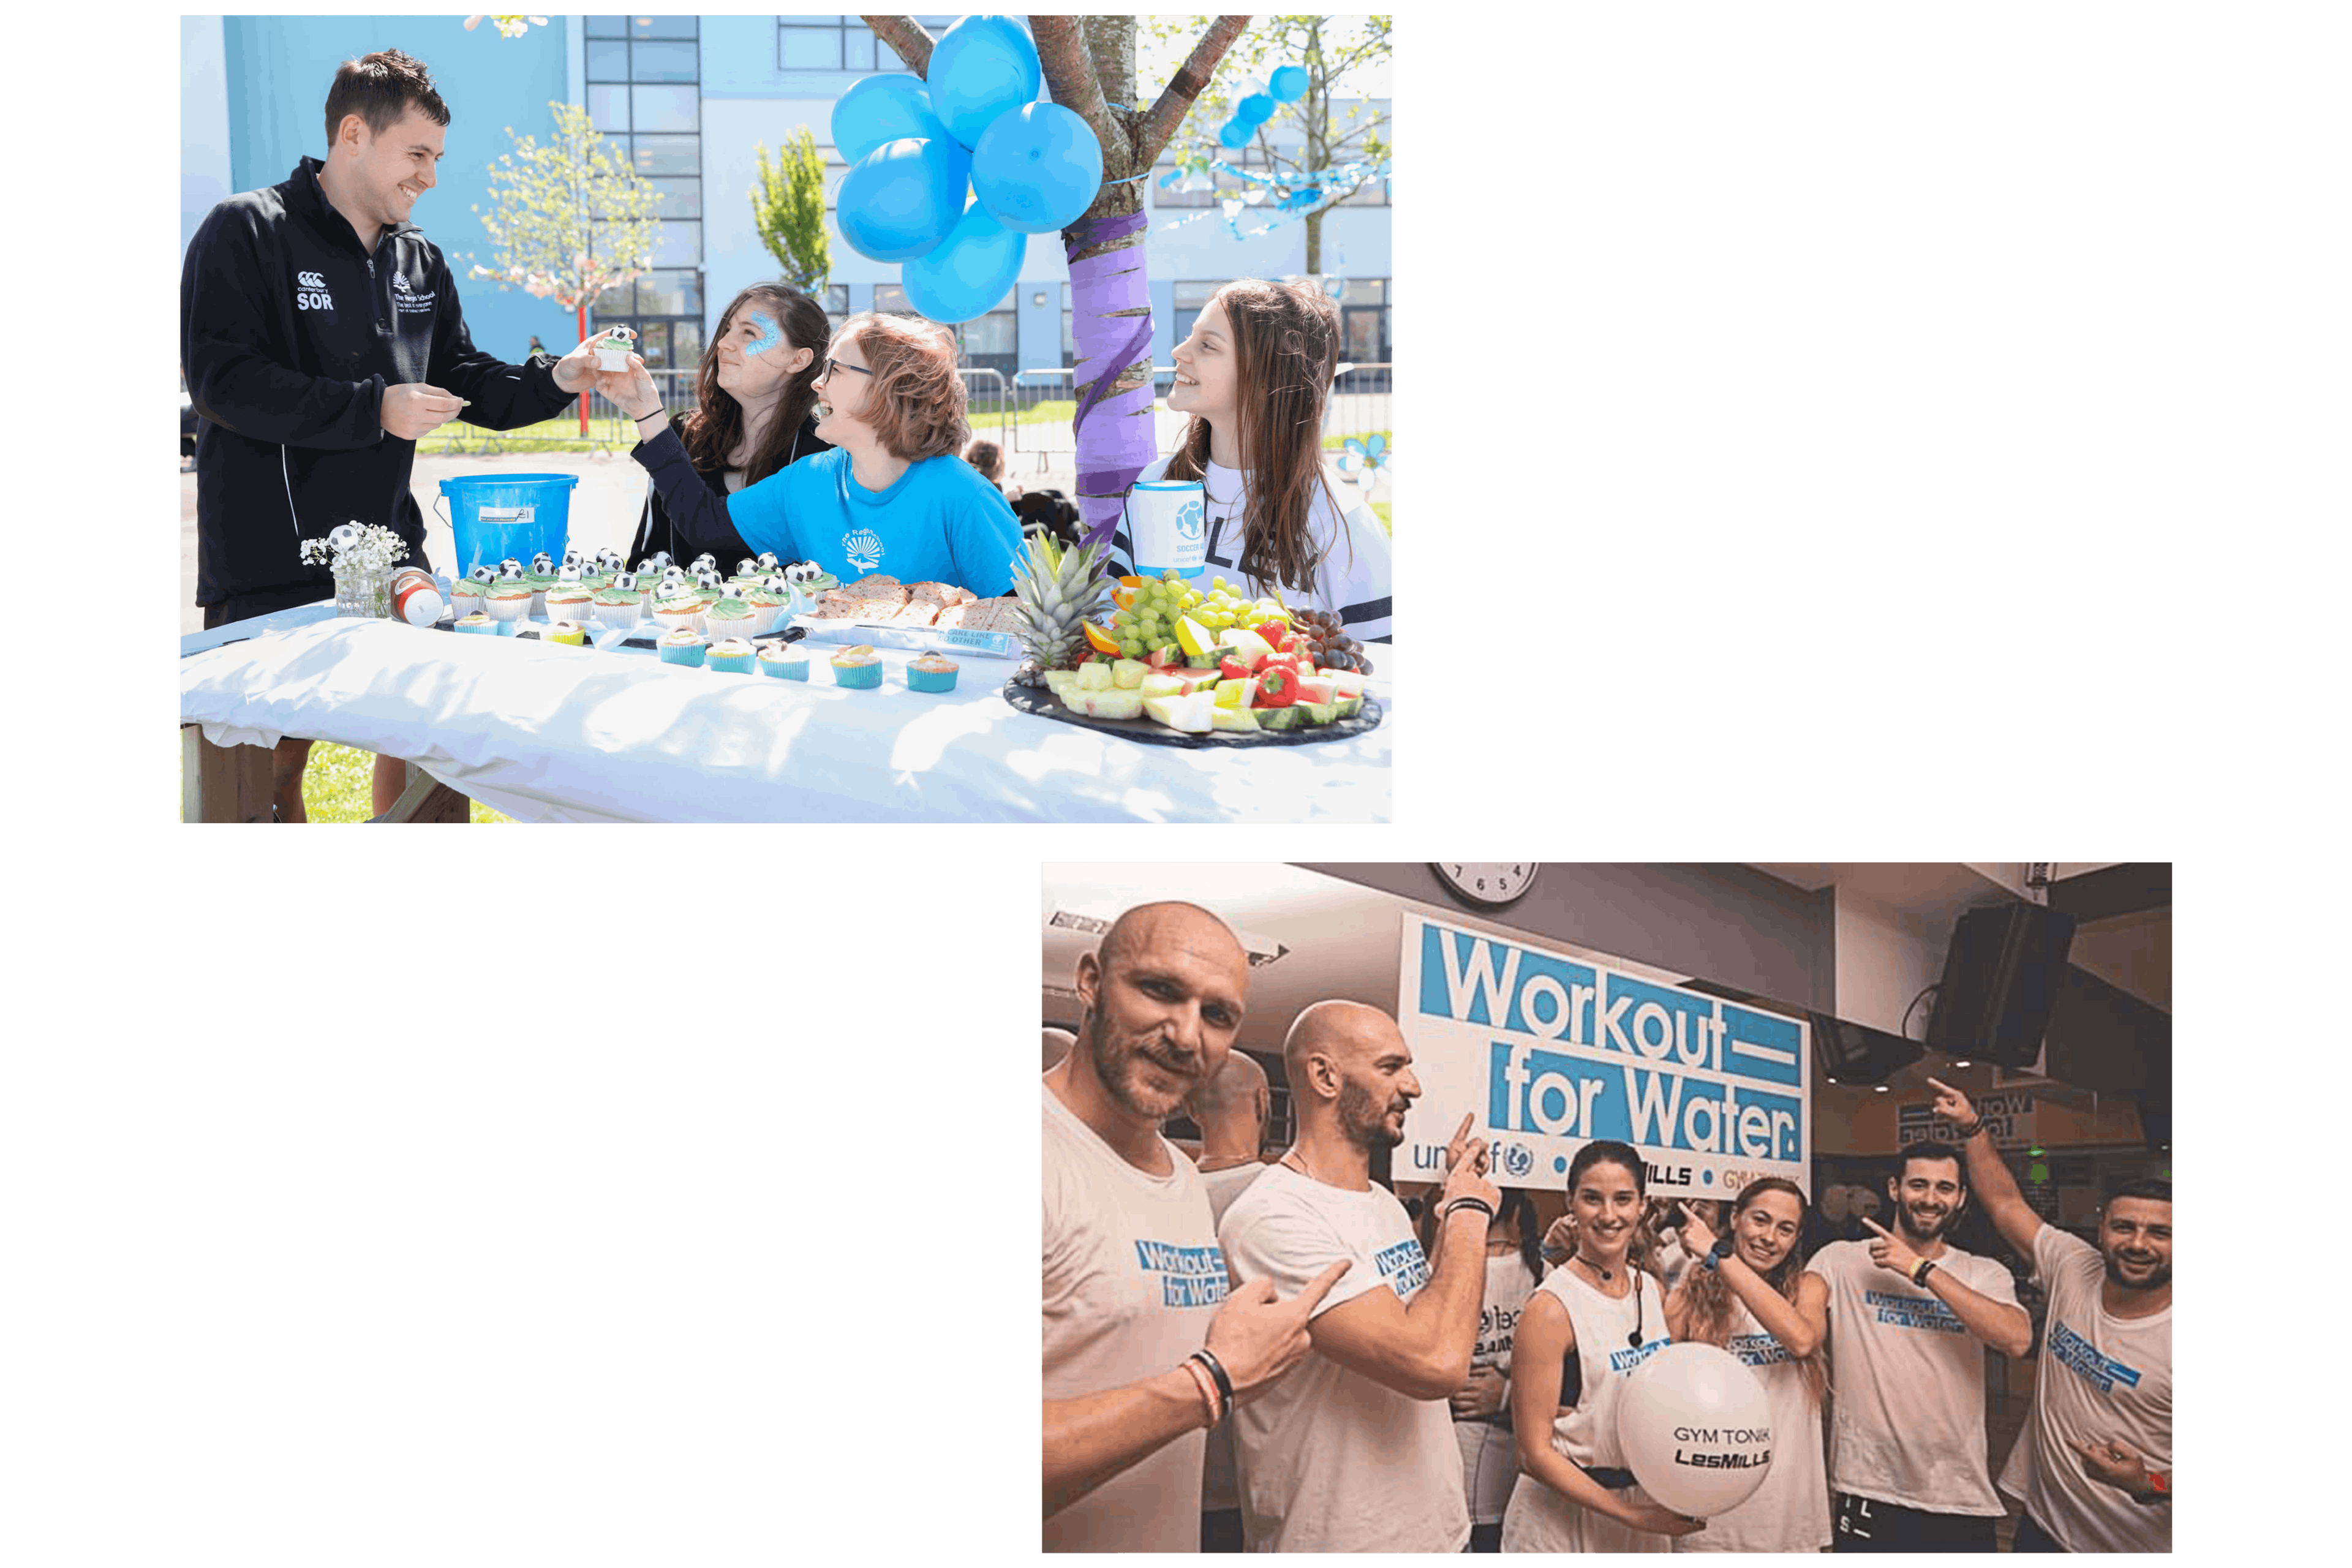 Images from UNICEF fundraisers like a bake sale and LesMills Workout for Water